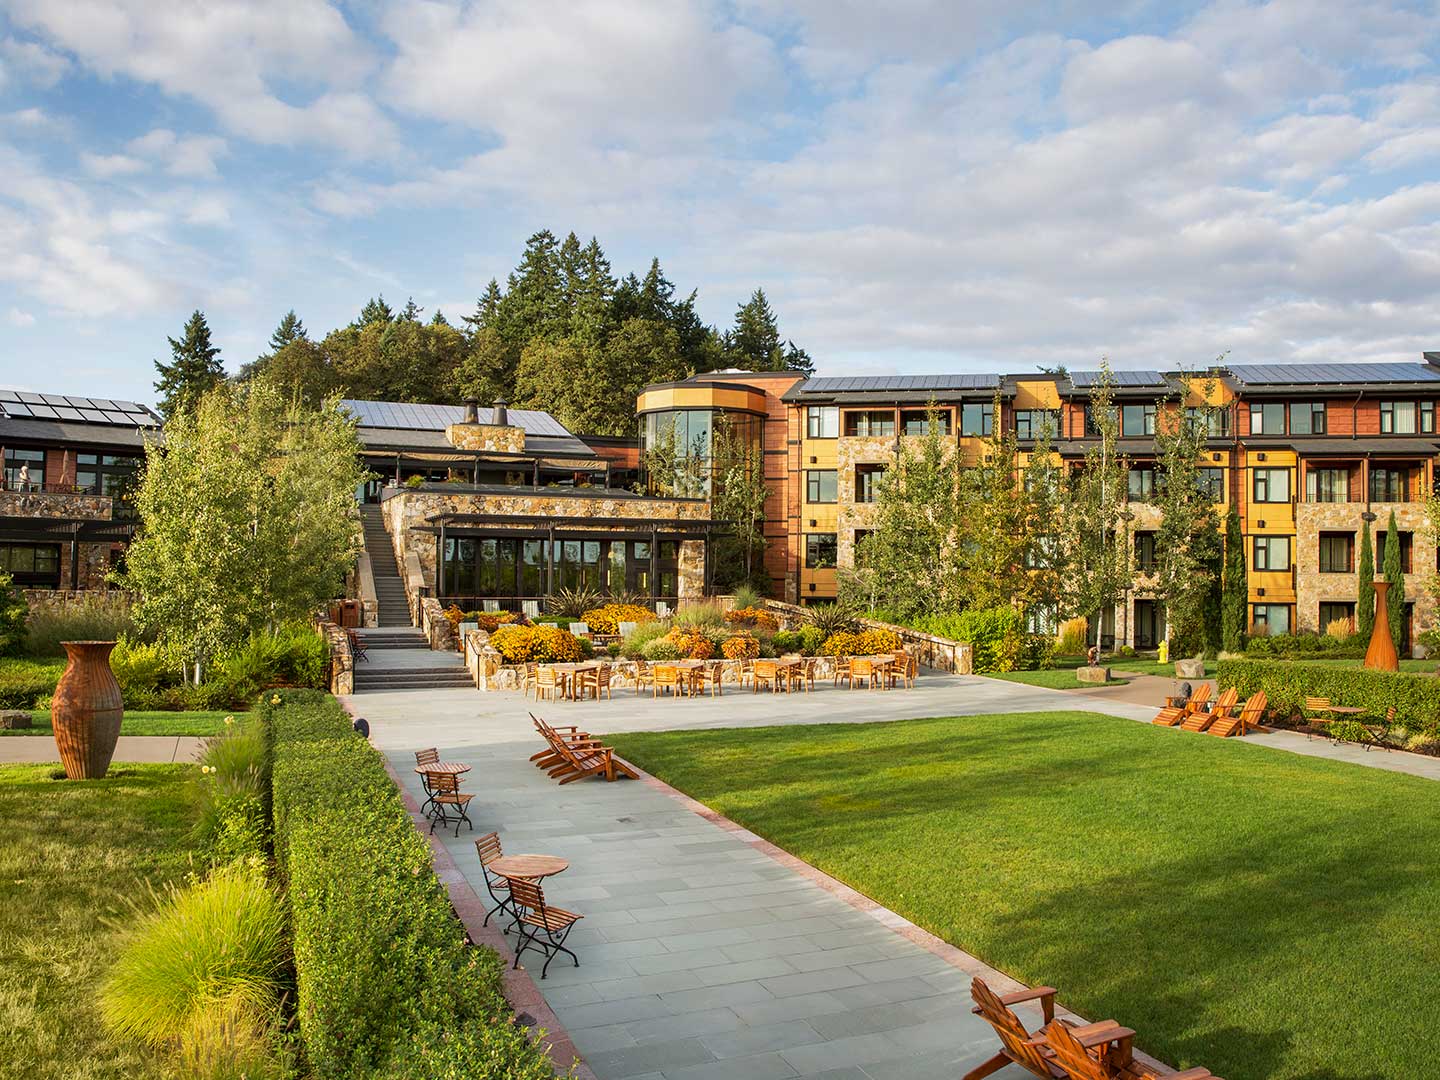 The Allison Inn and Spa in Willamette Valley, Oregon